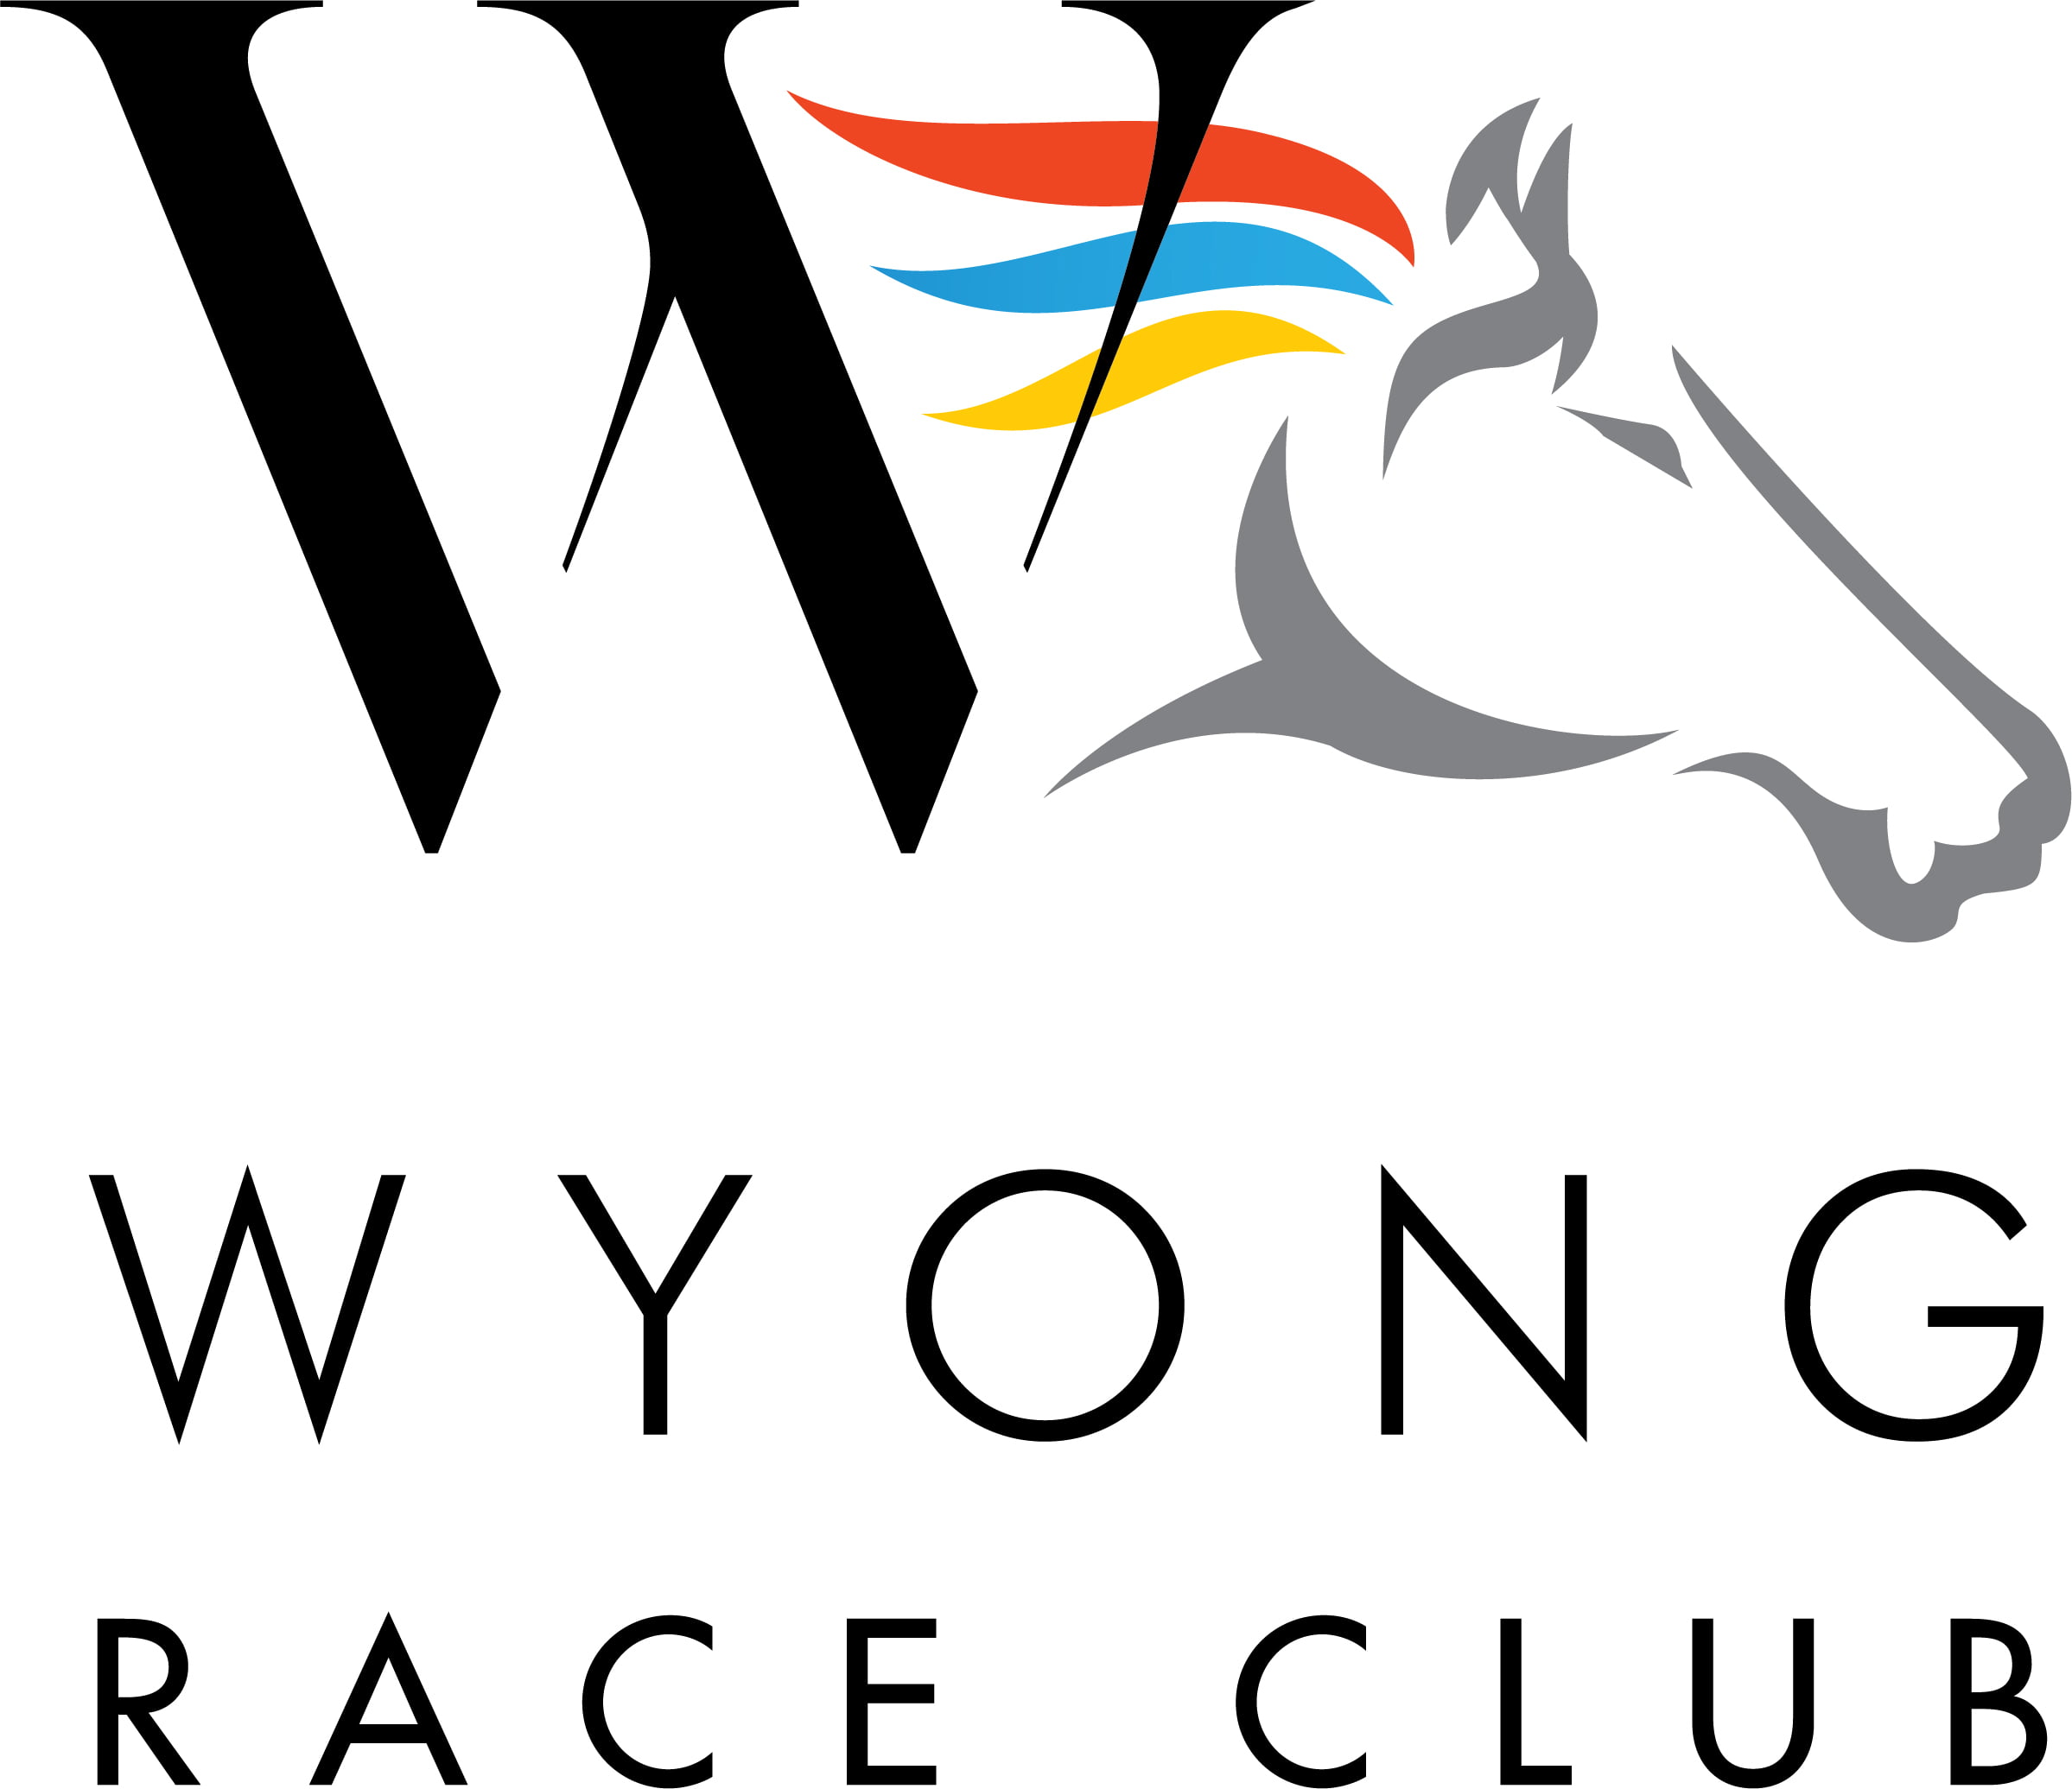 Wednesday March 20 Race Day 2